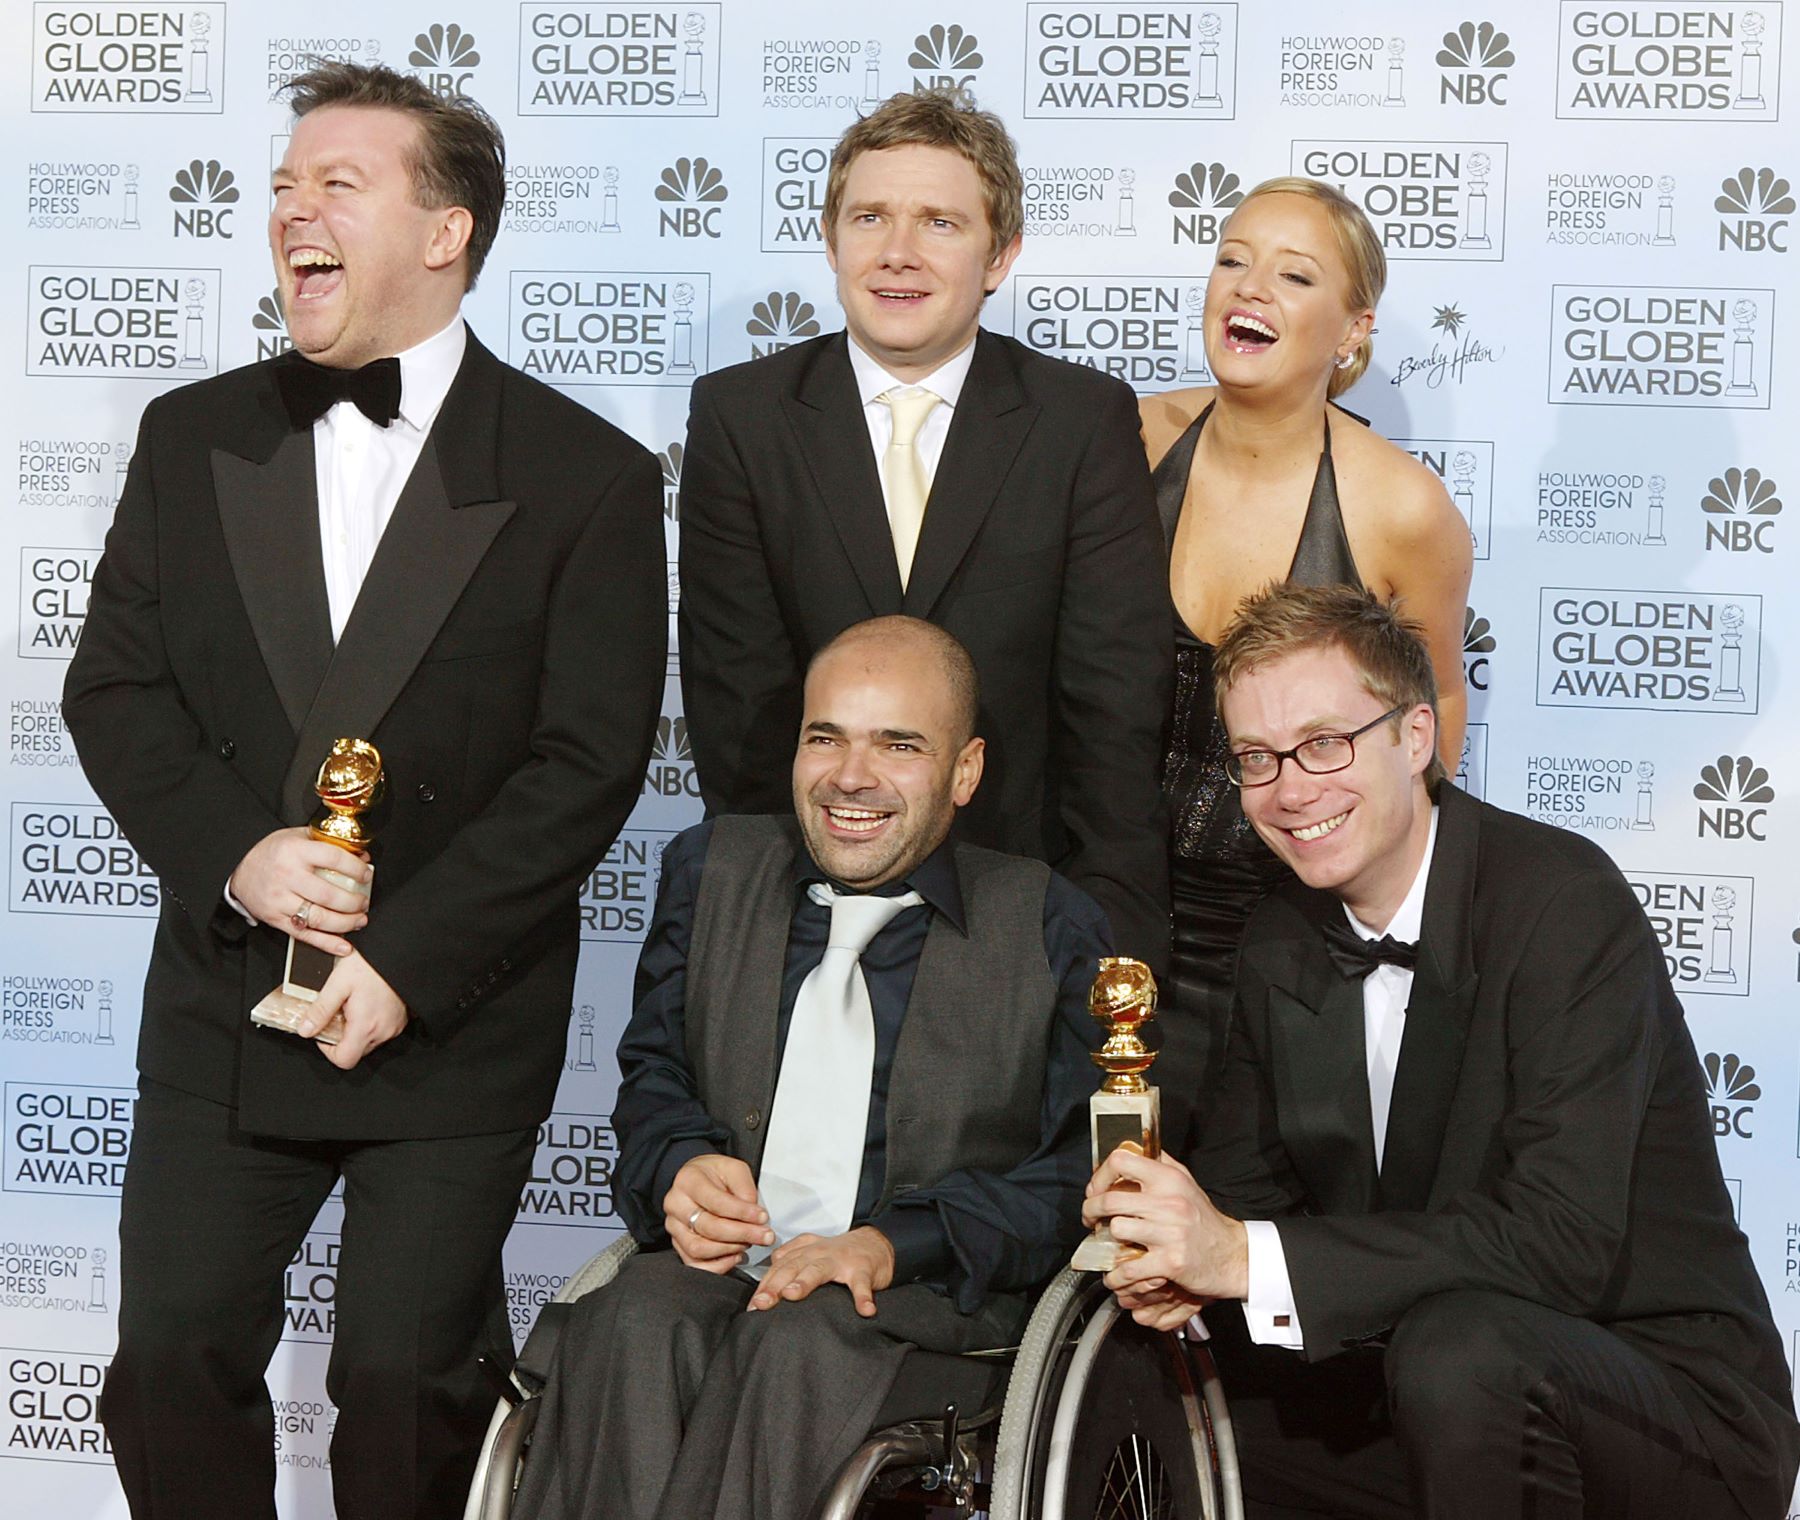 Stephen Merchant and the cast of 'The Office' after winning the Golden Globe for the Best Television Series